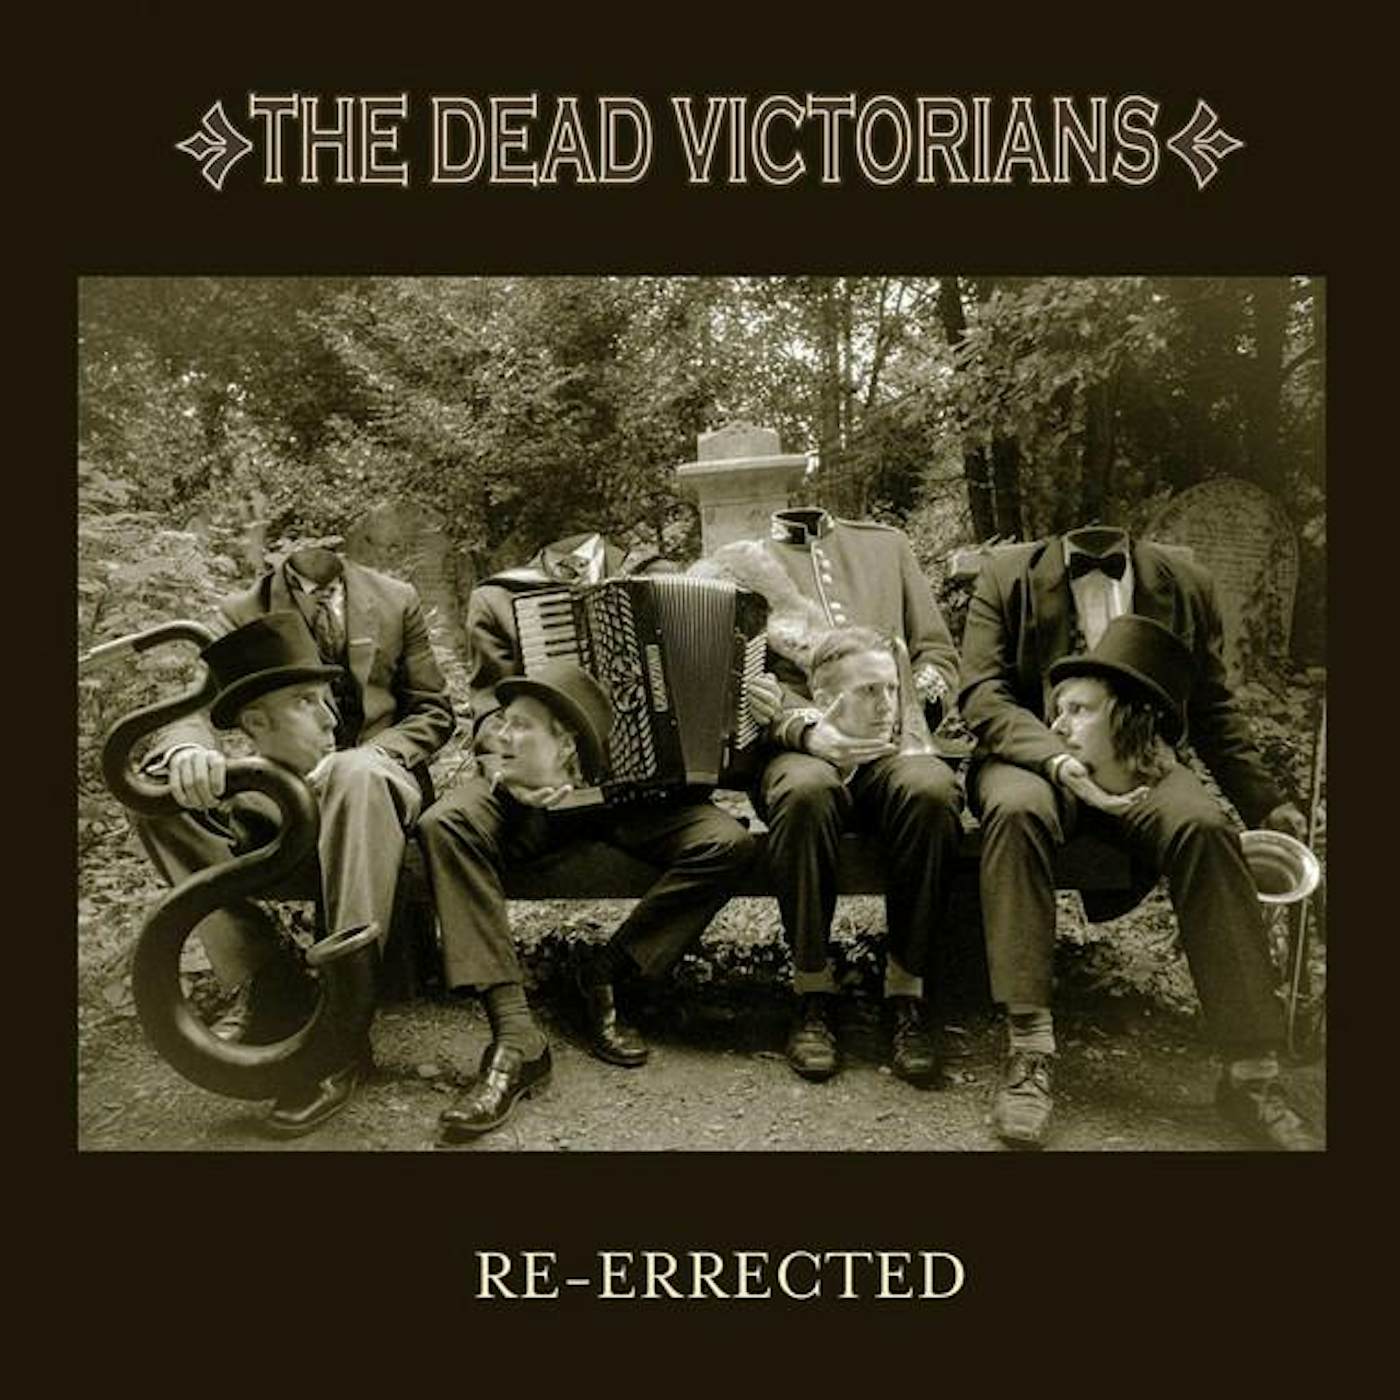 The Dead Victorians